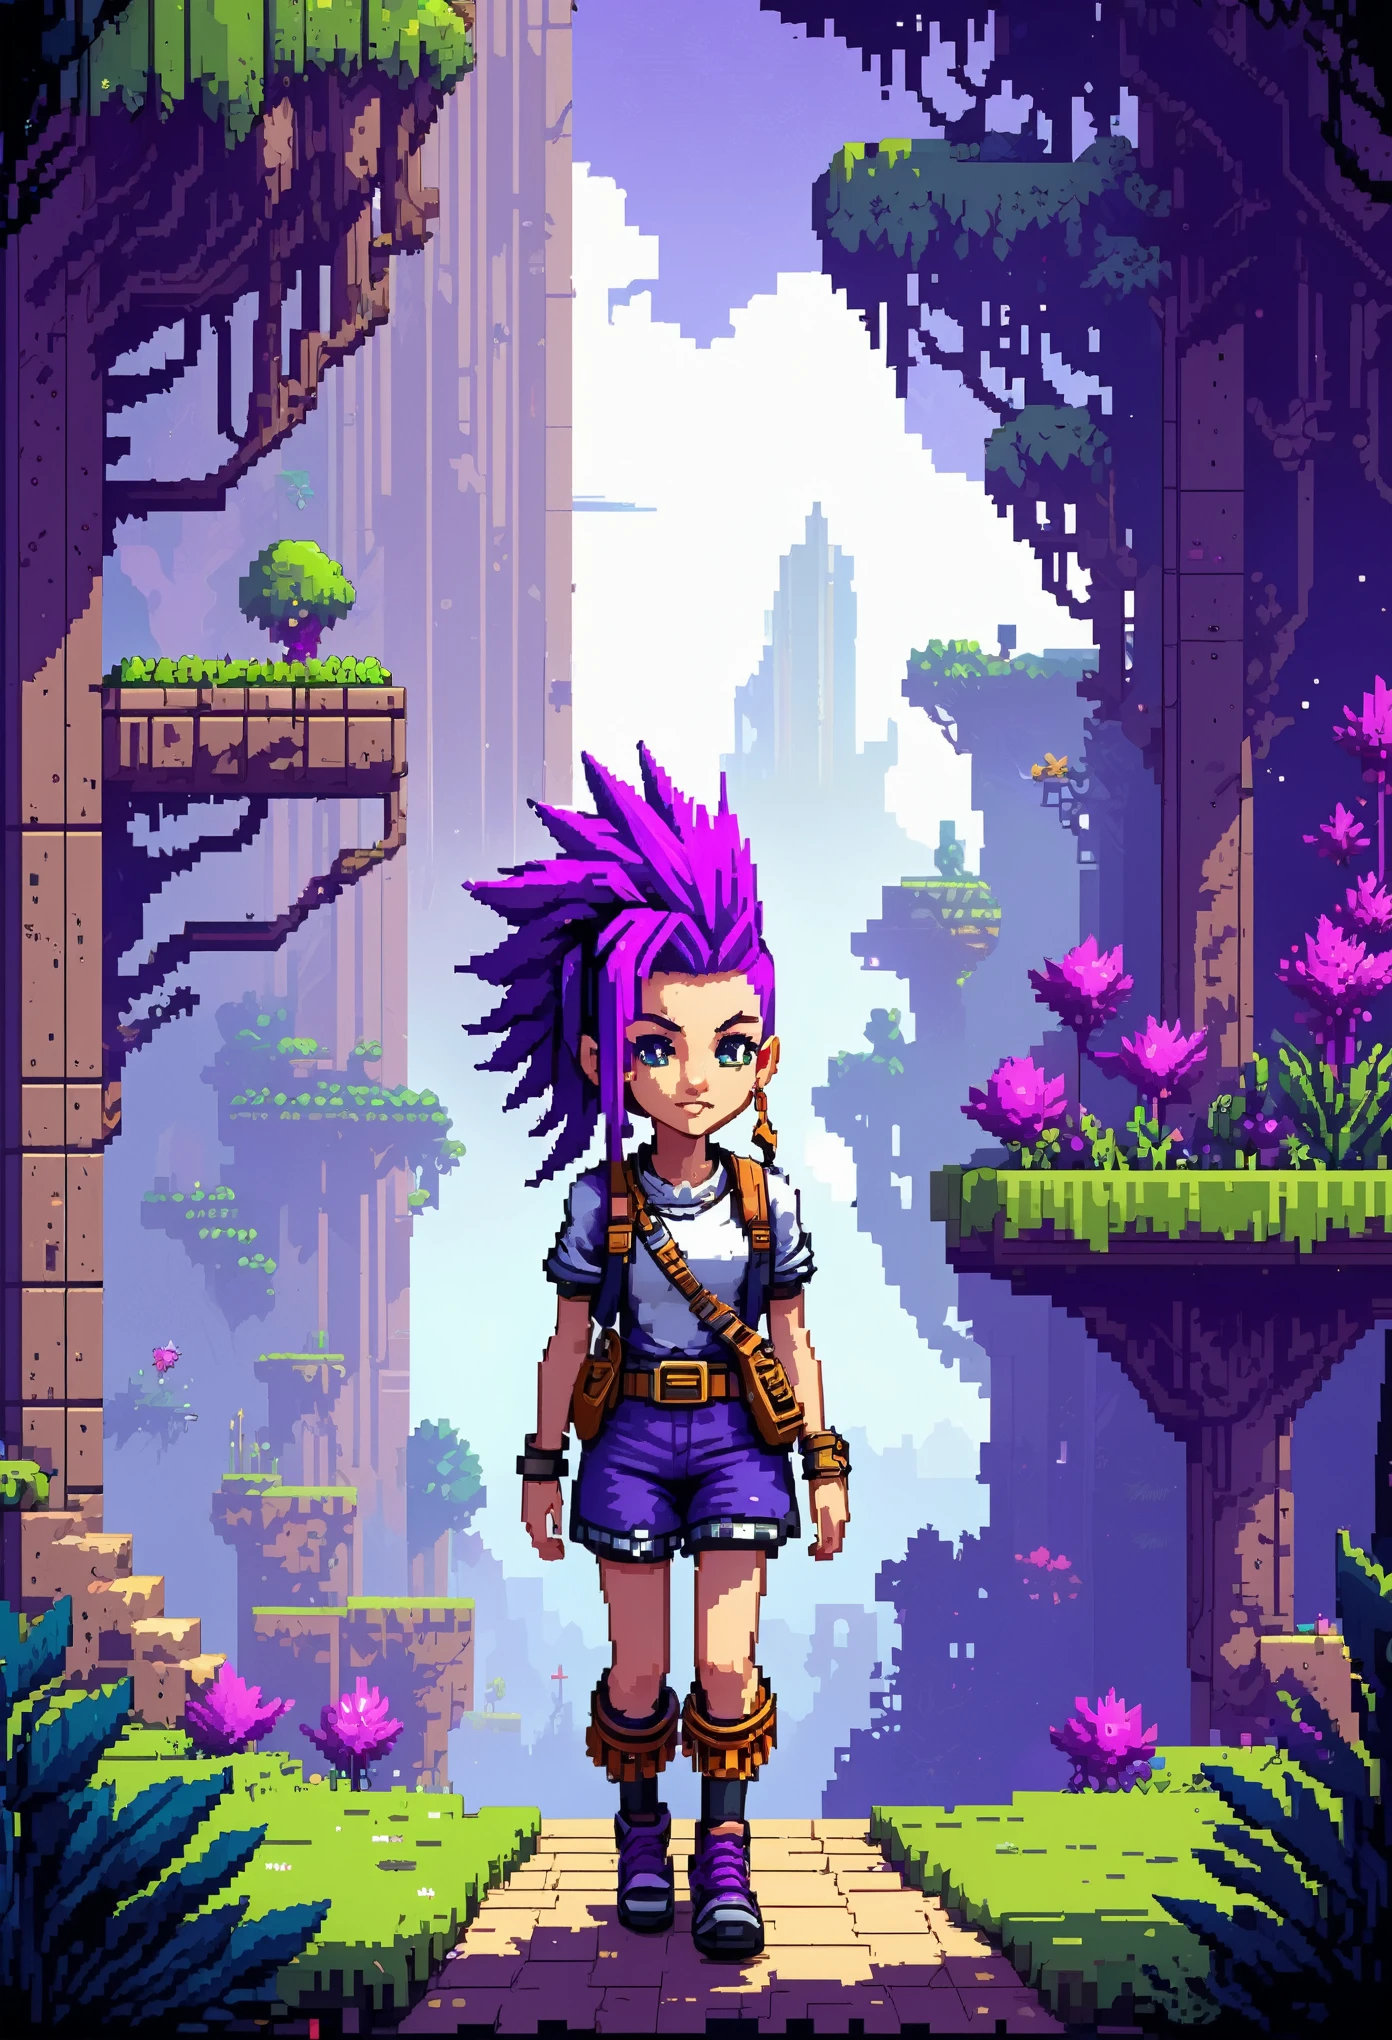 Pixel-Art Adventure featuring a Girl with a purple mohawk: Pixelated girl character, vibrant 8-bit environment, reminiscent of classic games.,Leonardo Style